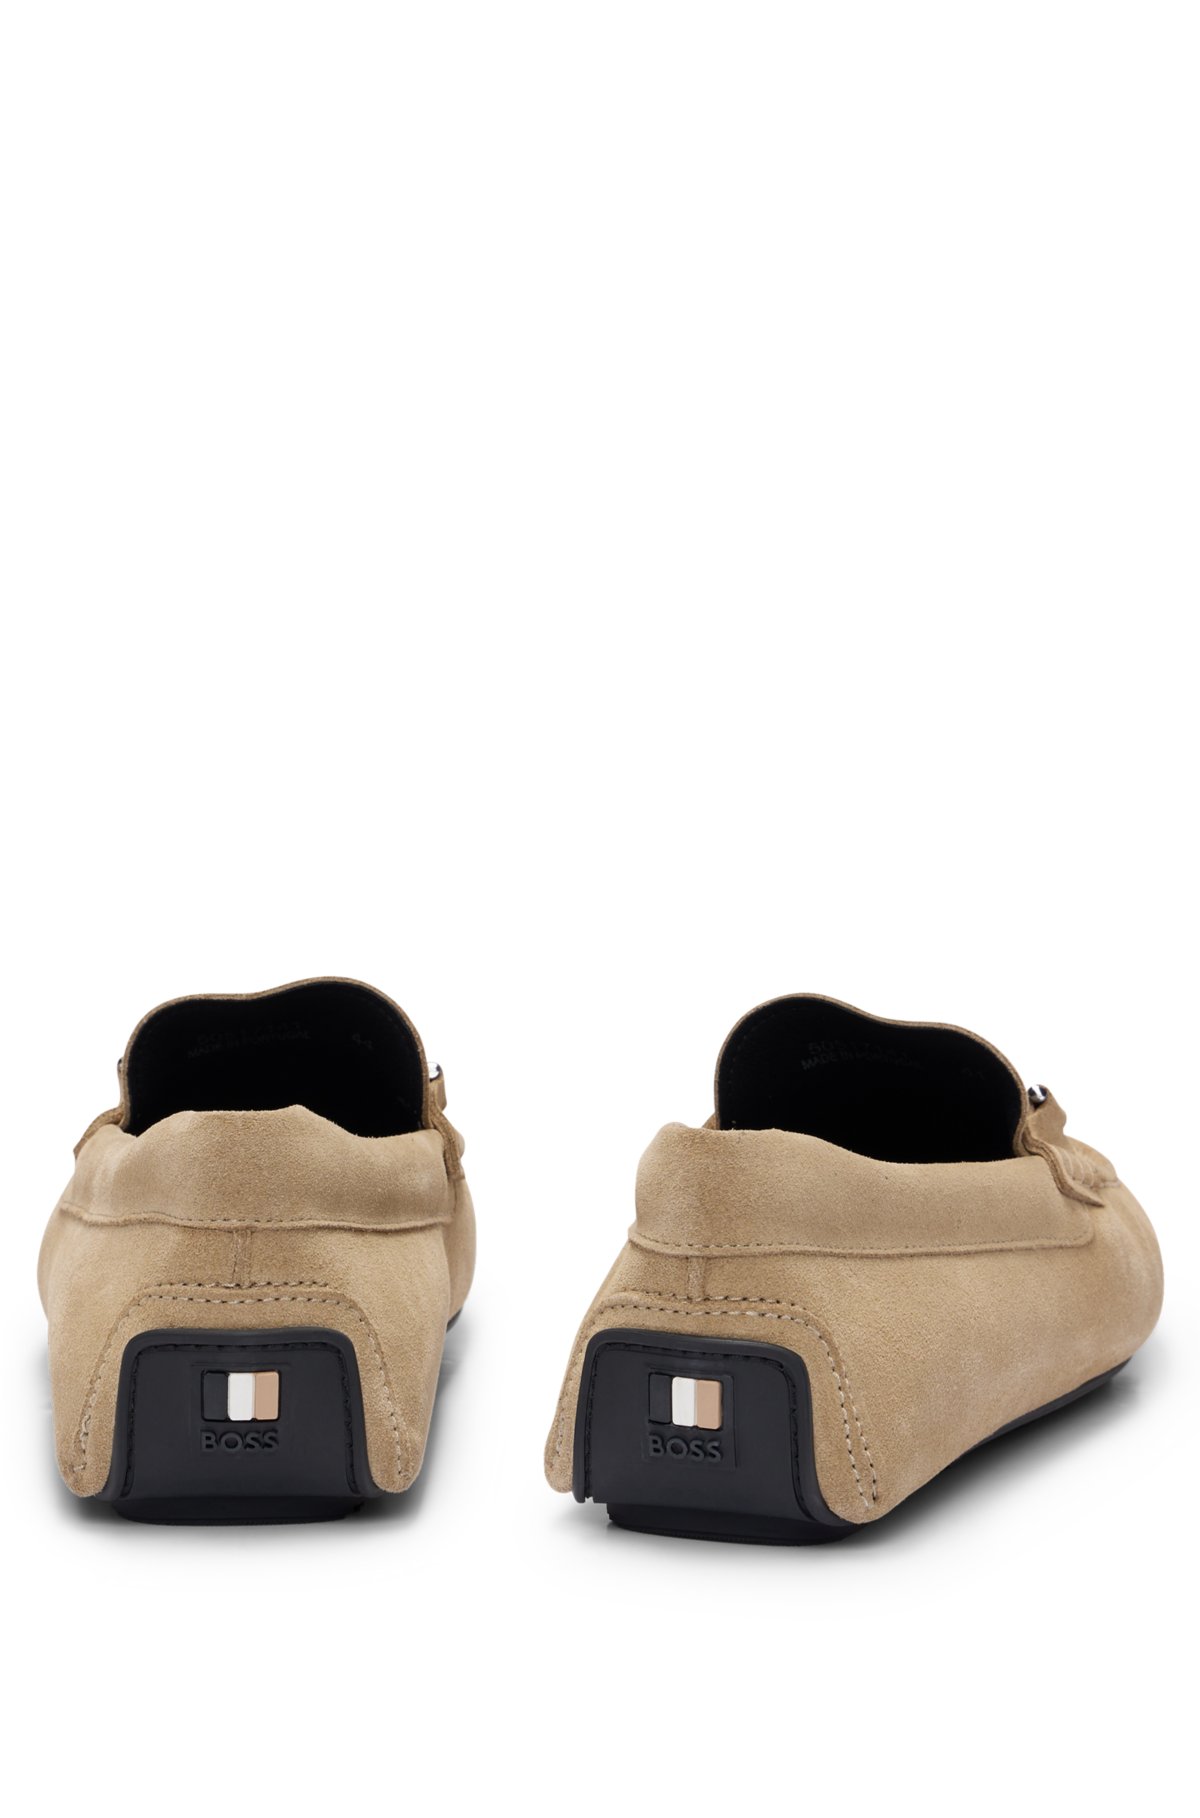 BOSS - Suede moccasins with branded hardware and full lining